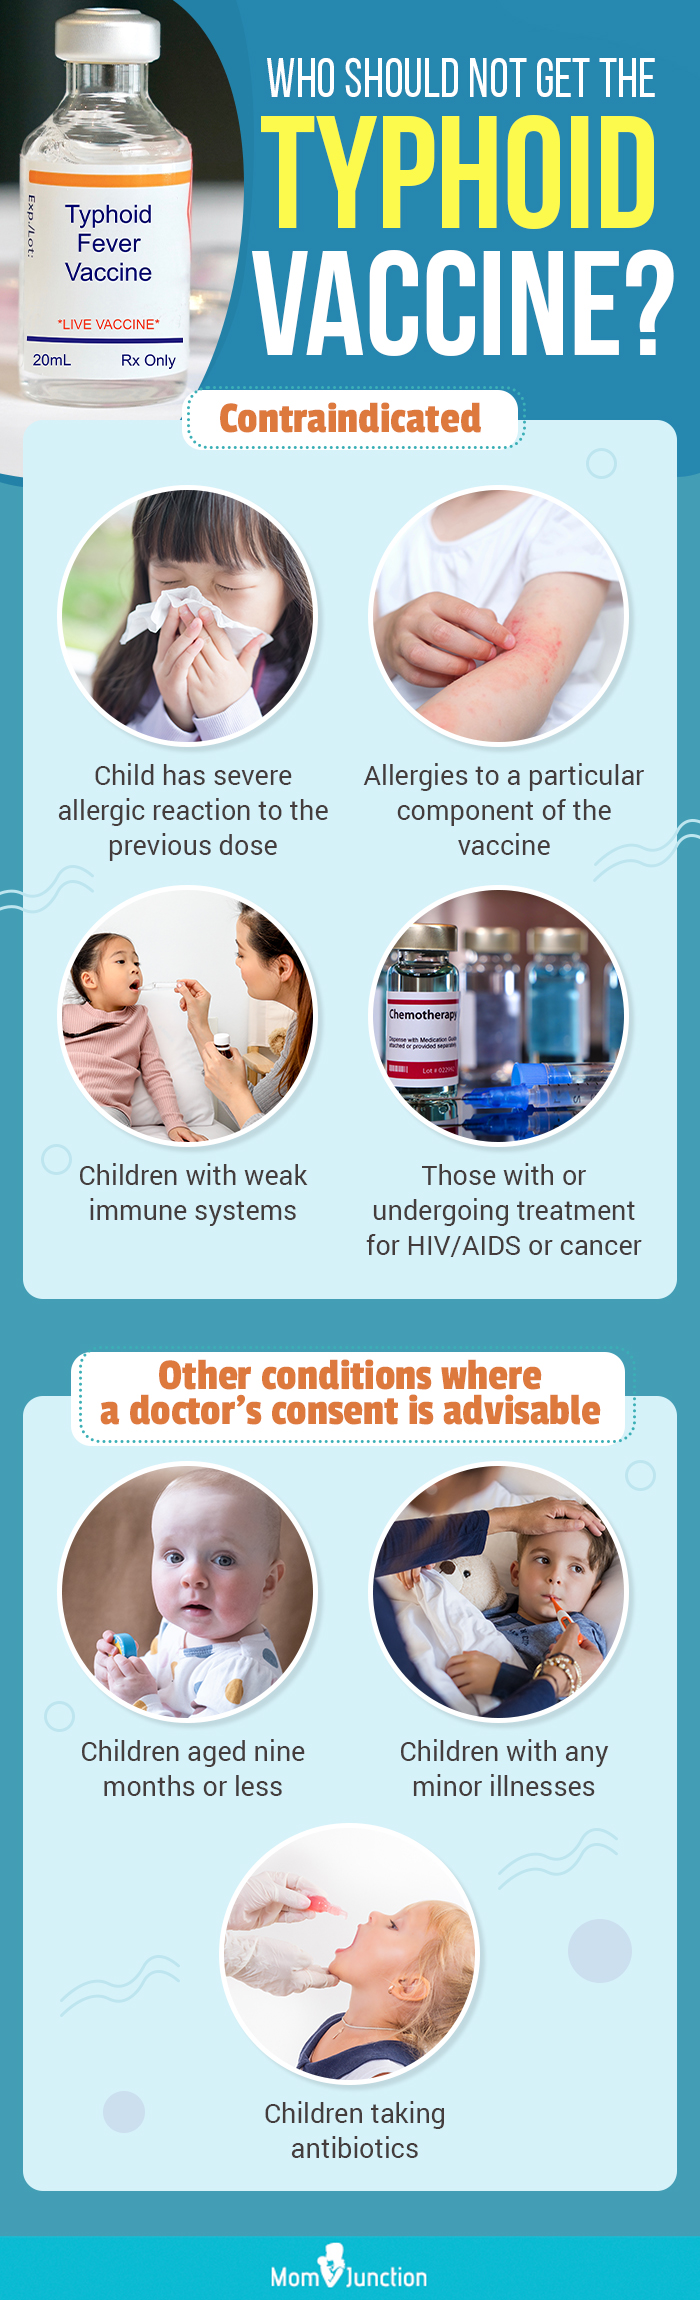 who should not get the typhoid vaccine (infographic)